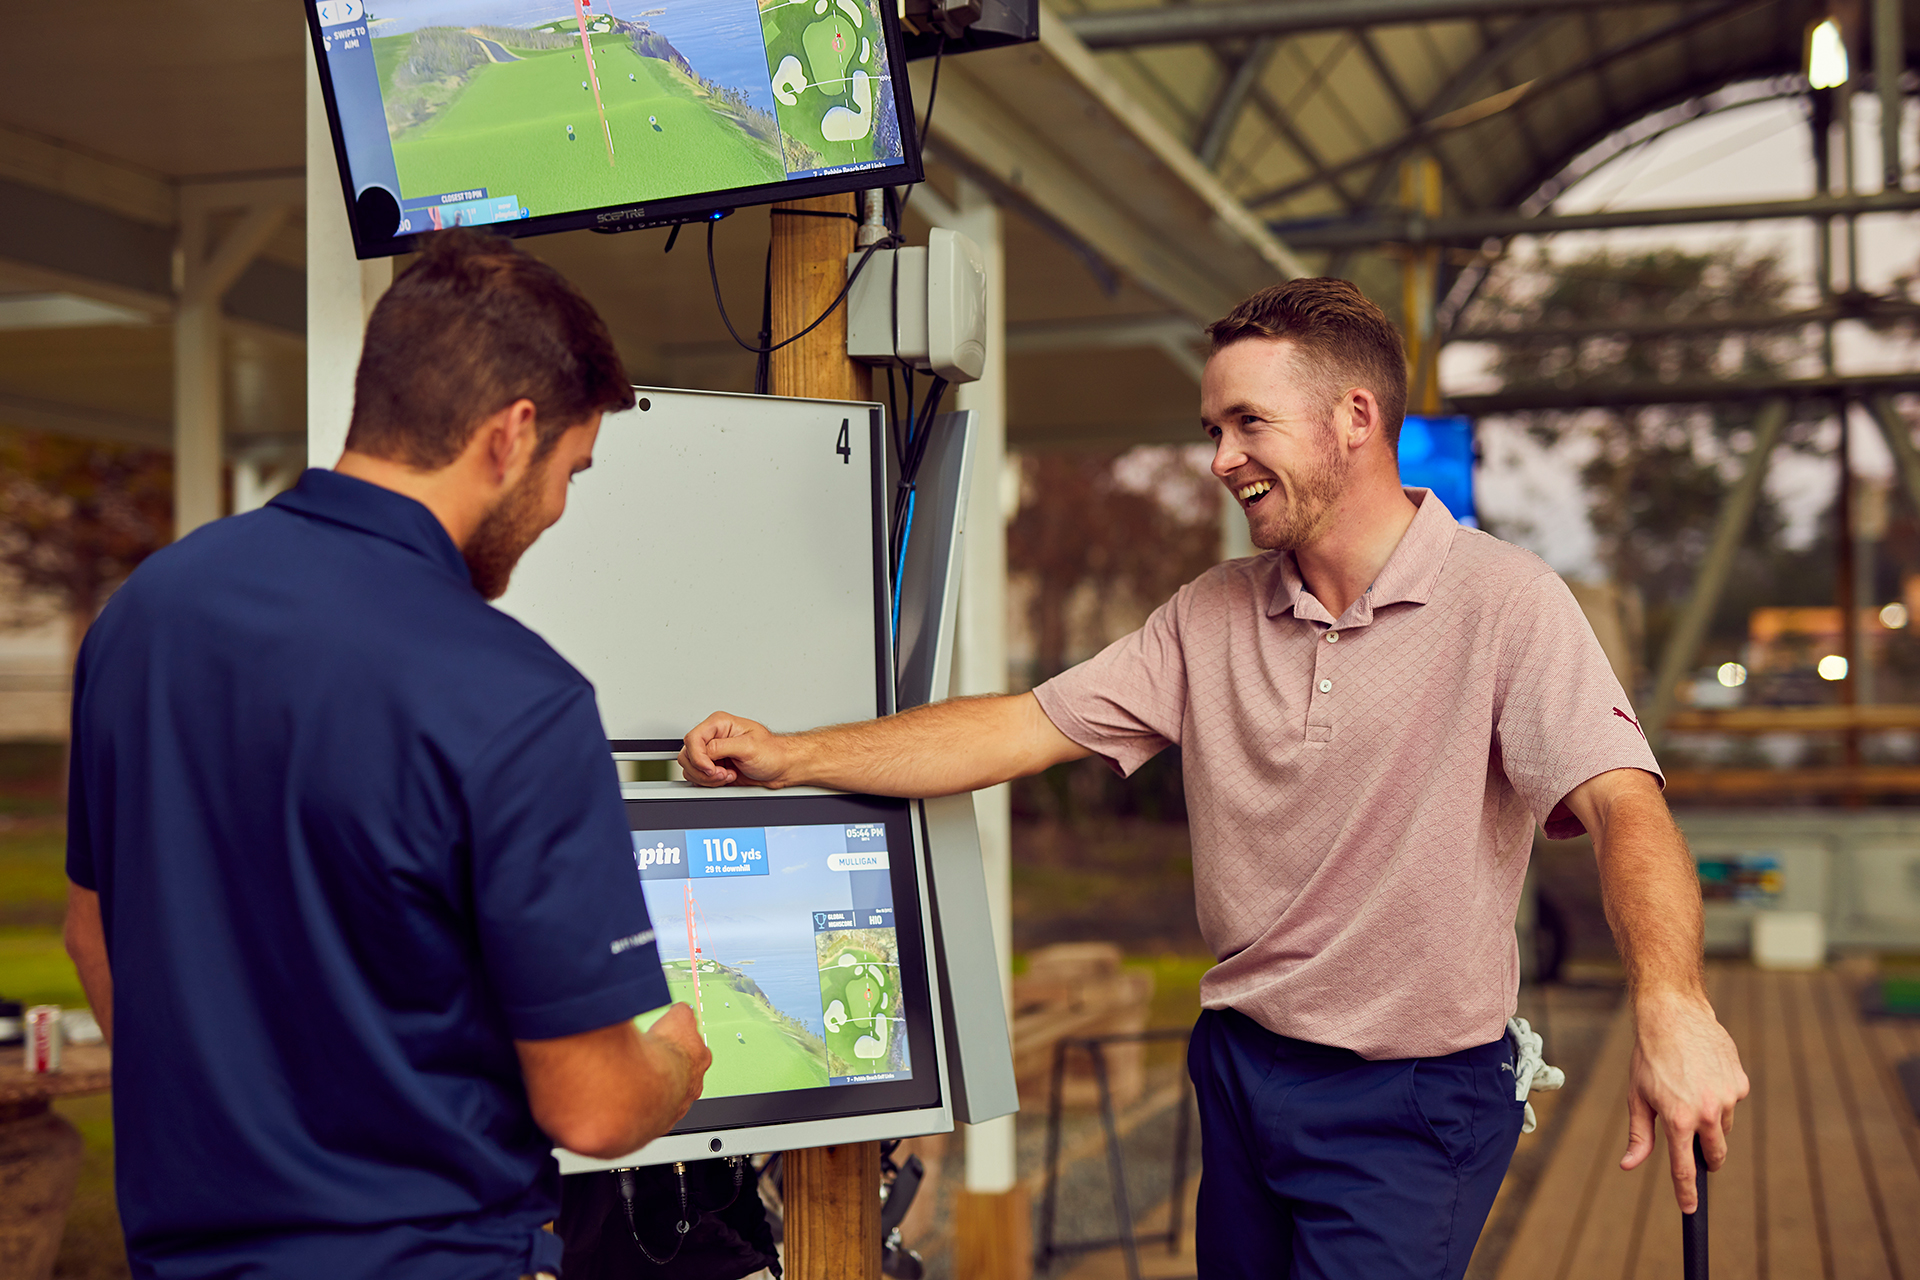 Toptracer Named an ‘Official Range Technology’ of the PGA of America